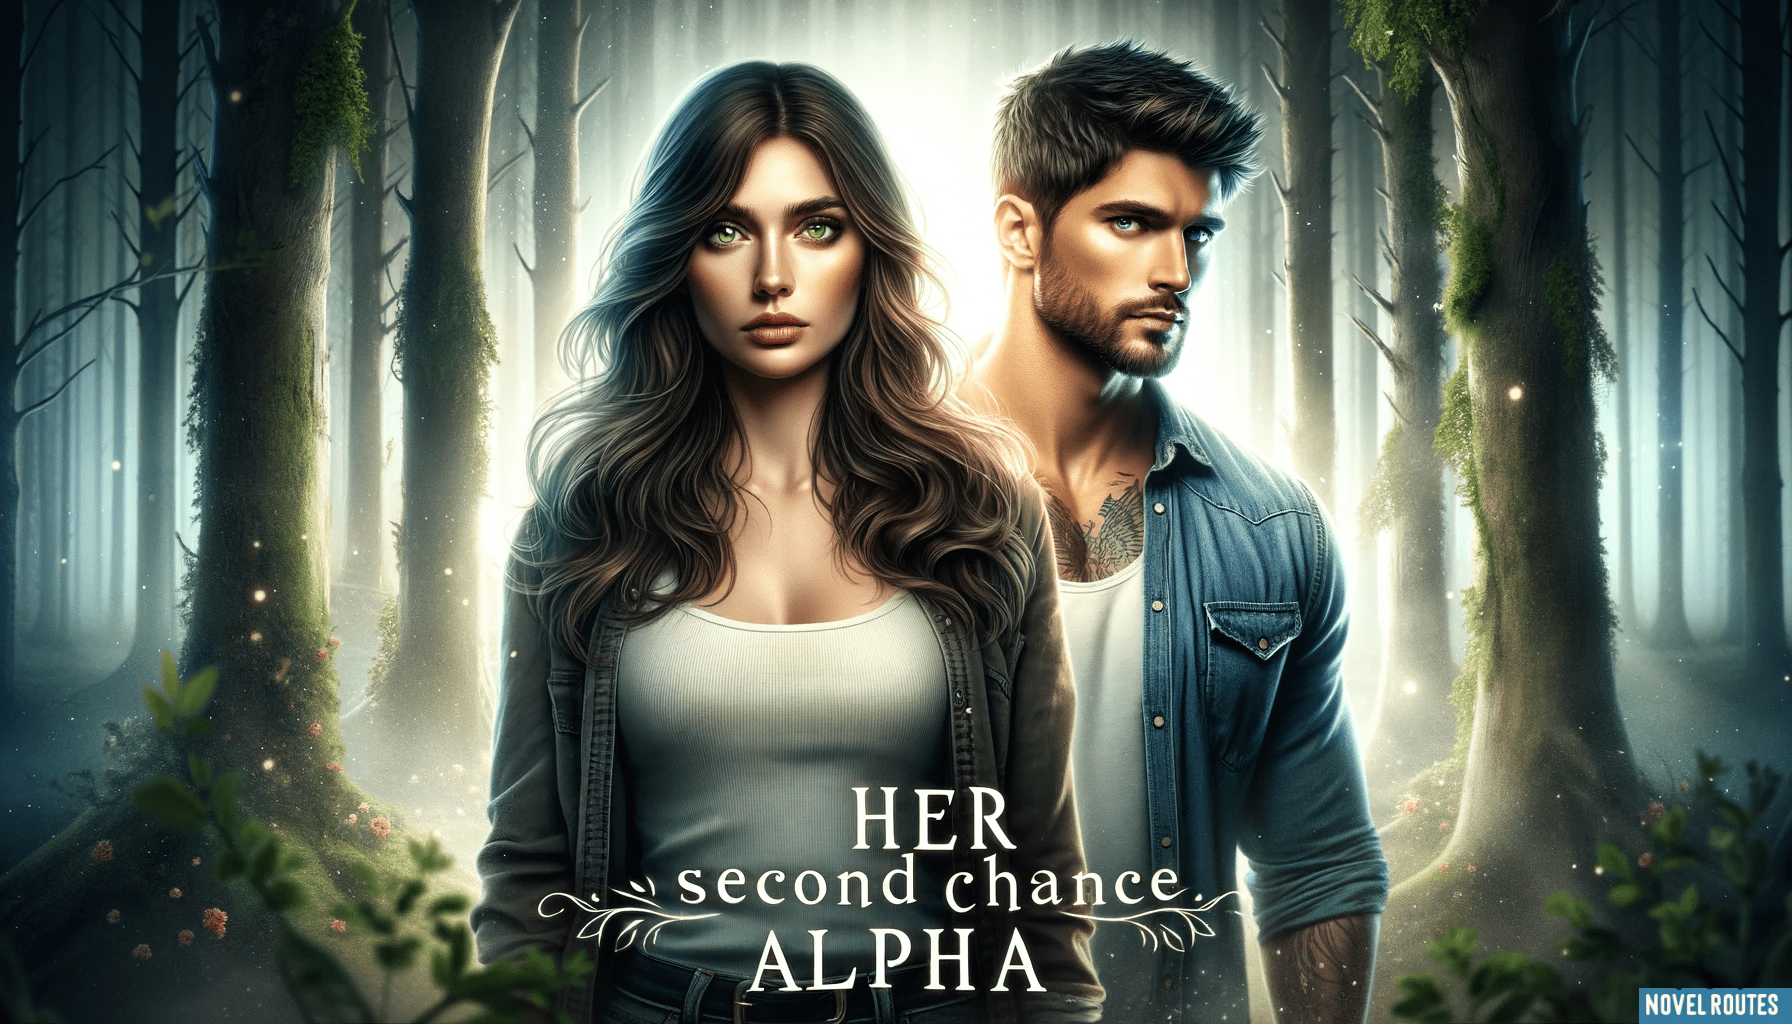 DALL·E 2023 12 16 20.03.24 Book cover for Her Second Chance Alpha featuring Holly and Jason. Holly has long wavy brown hair and green eyes and Jason has short dark hair and